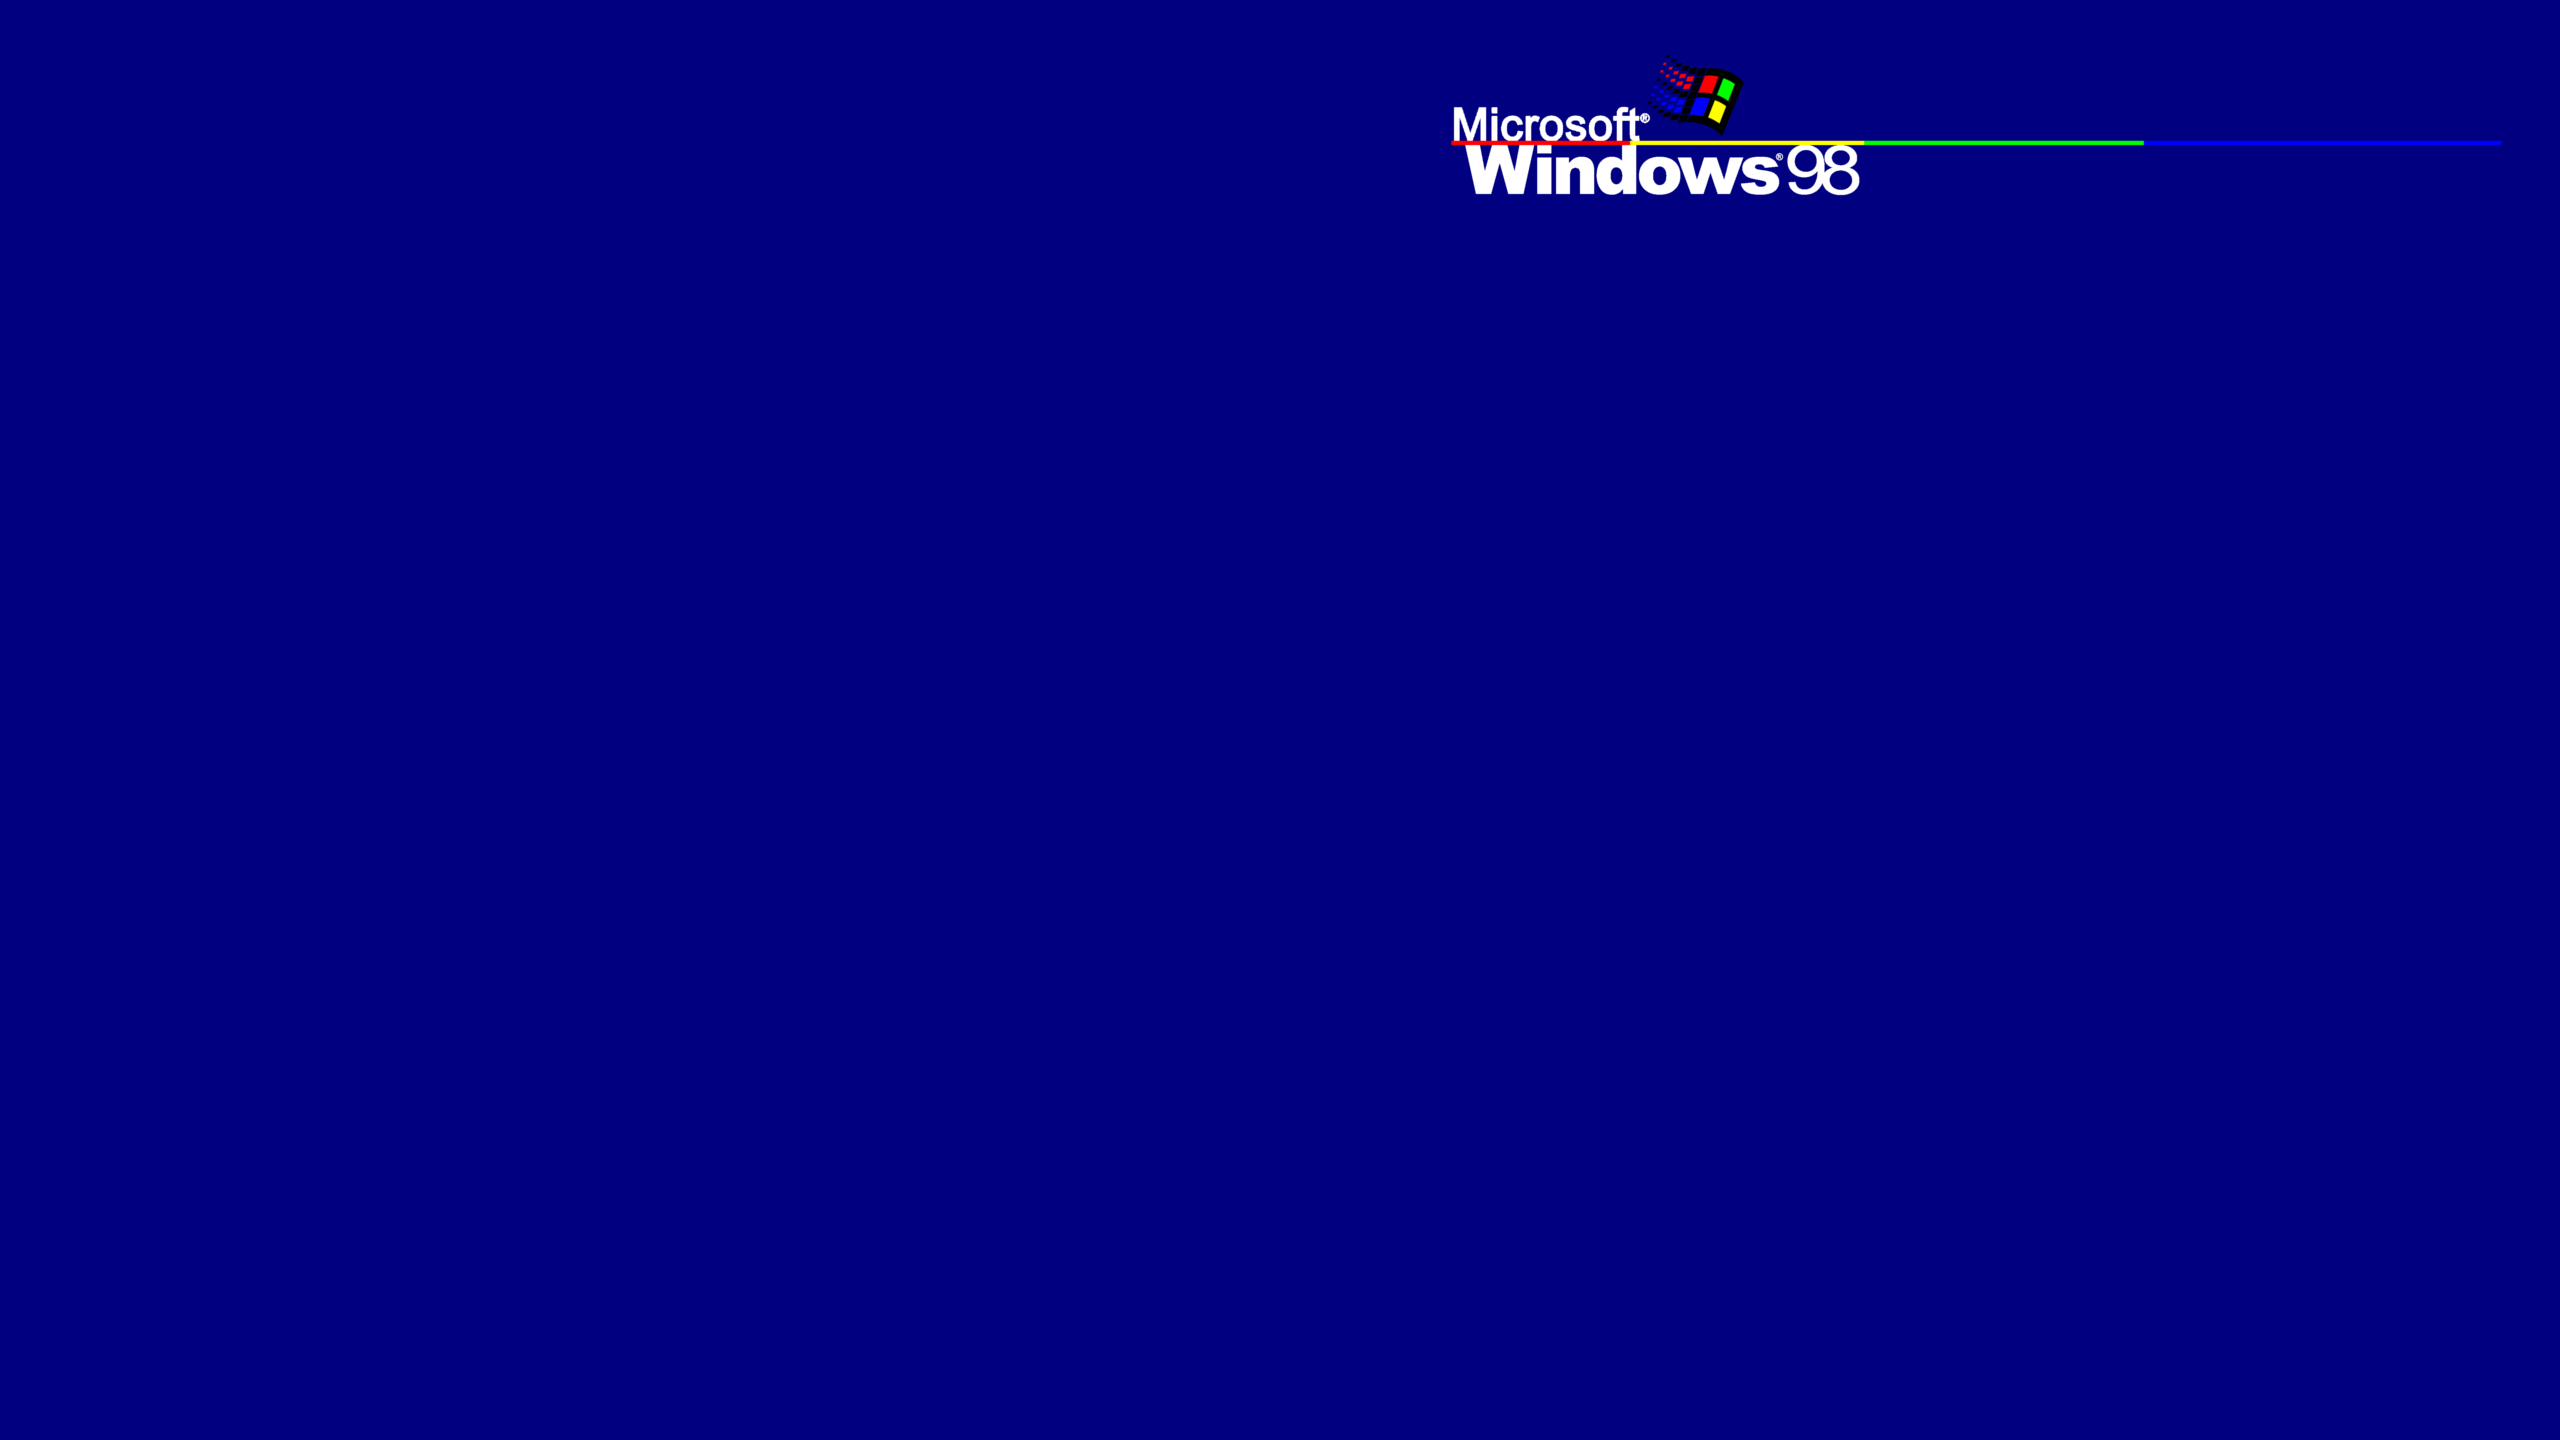 2560x1440 Windows 98 Wallpapers Top Free Windows 98 Backgrounds